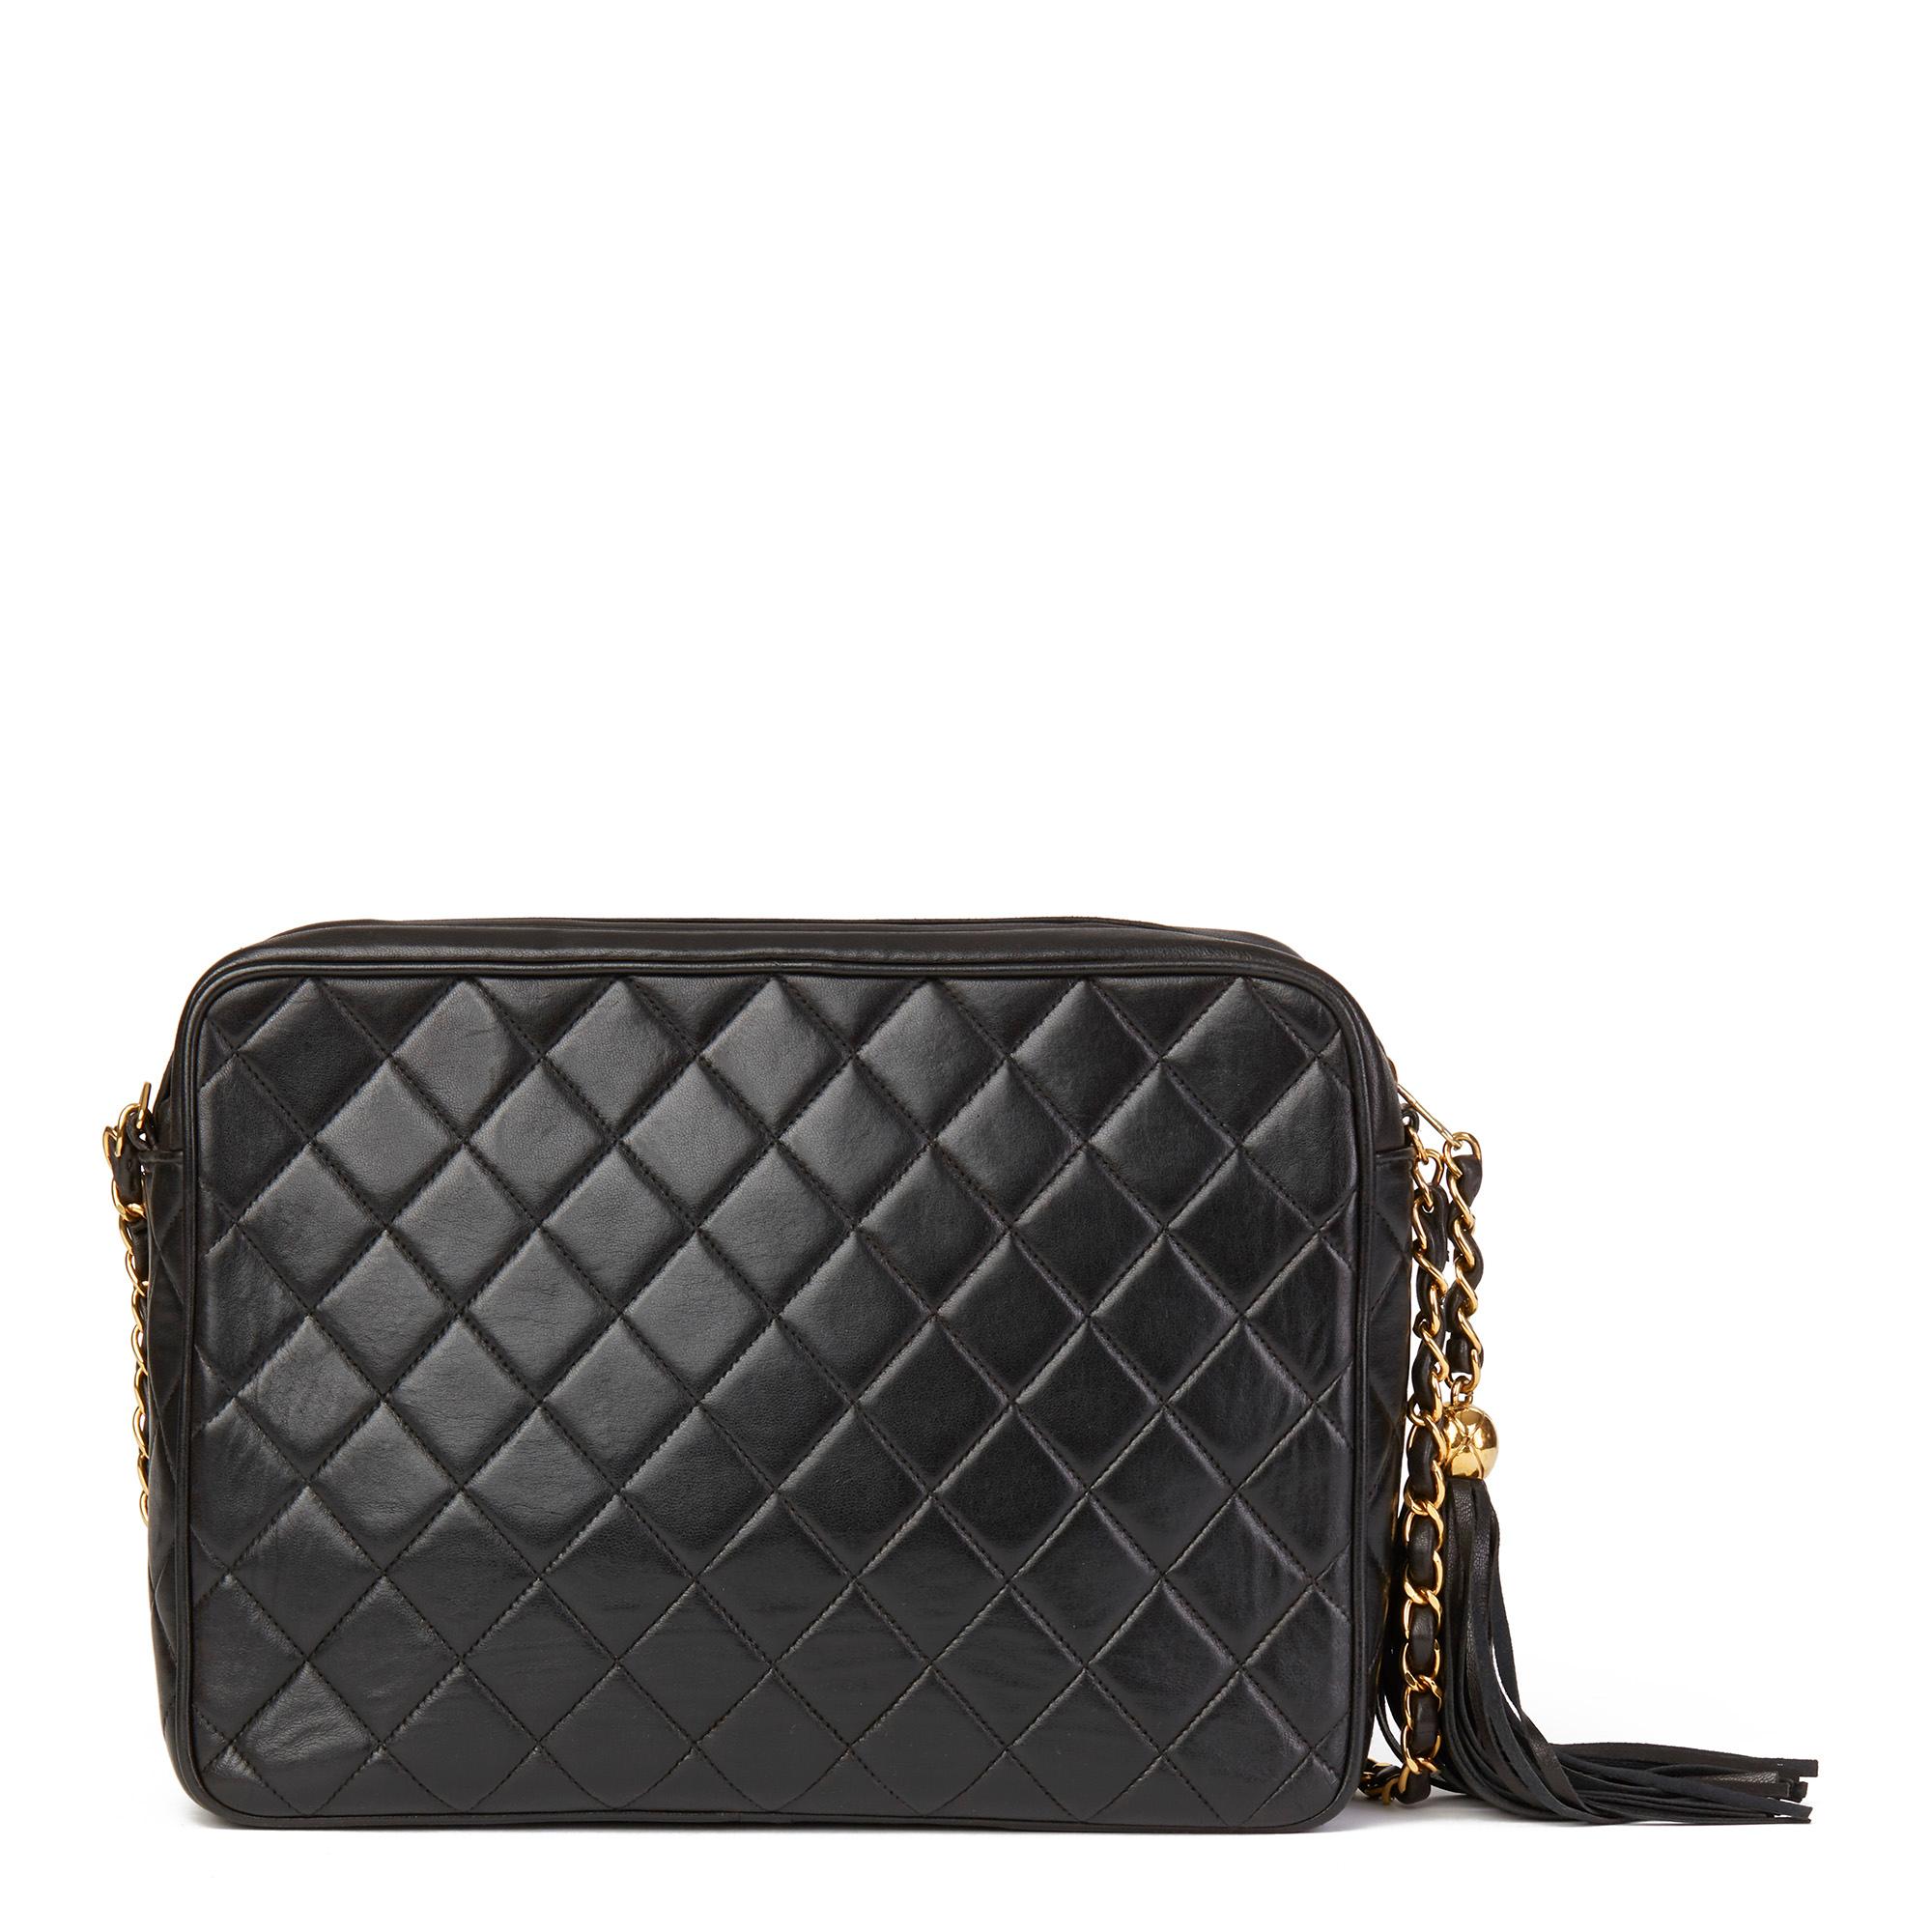 Women's 1996 Chanel Black Quilted Lambskin Vintage Camera Bag